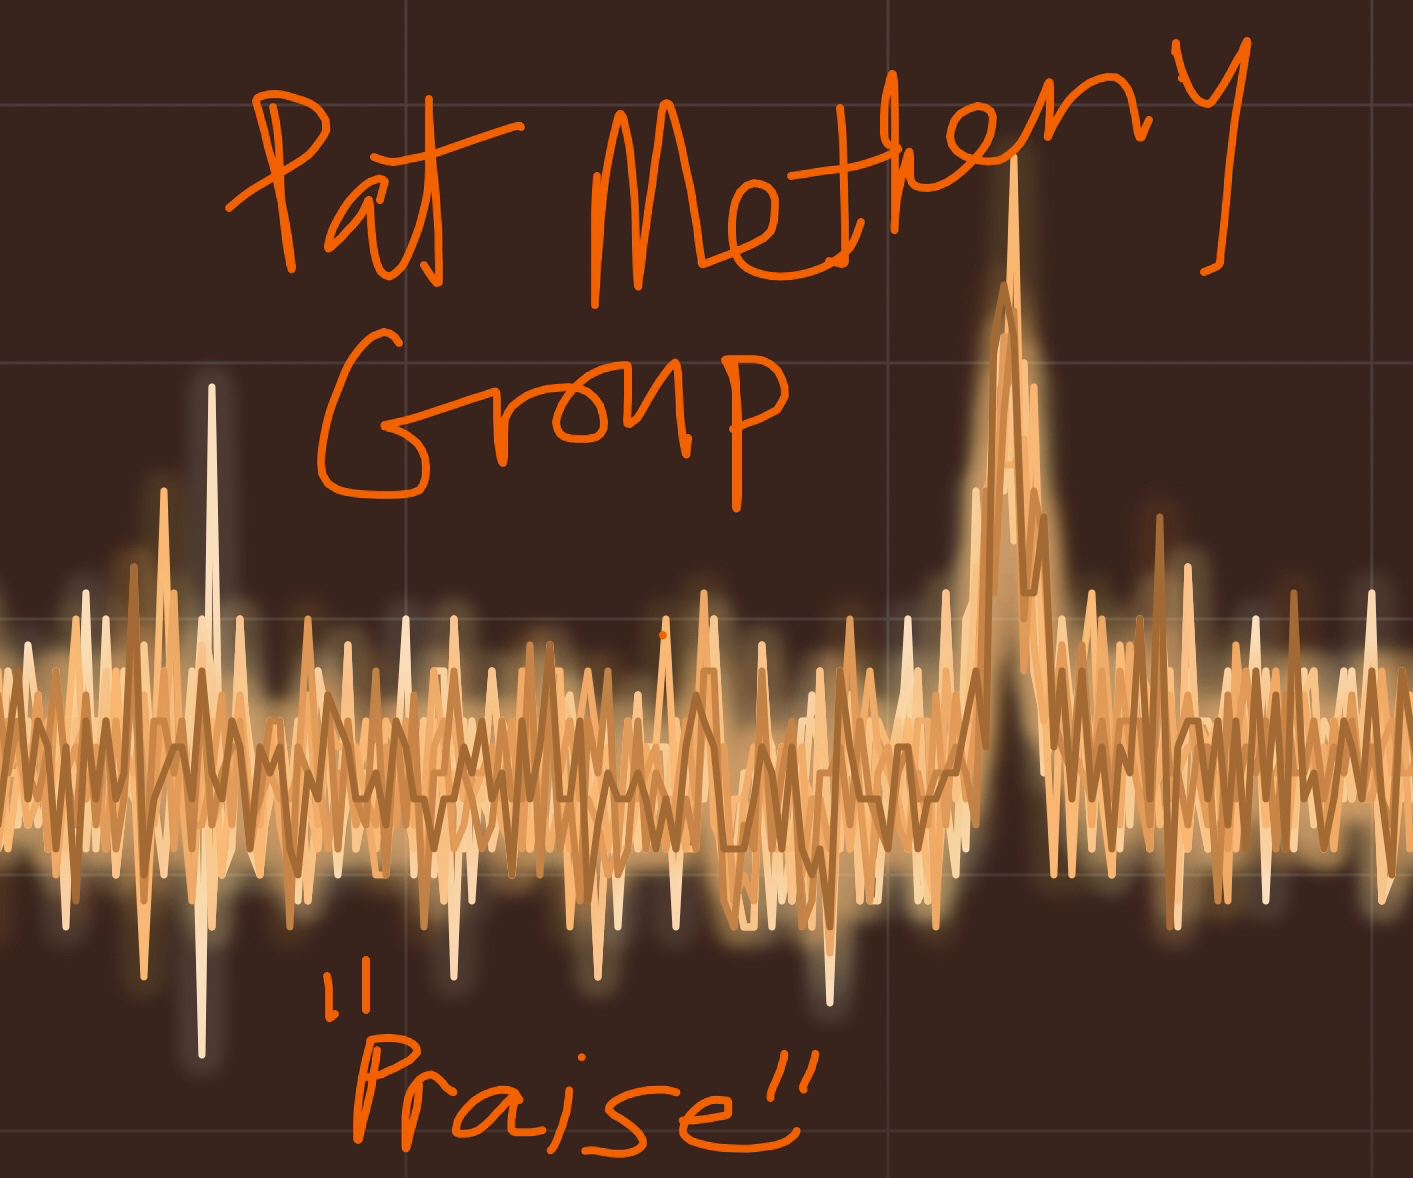 the tempo of Pat Metheny and Lyle Mays